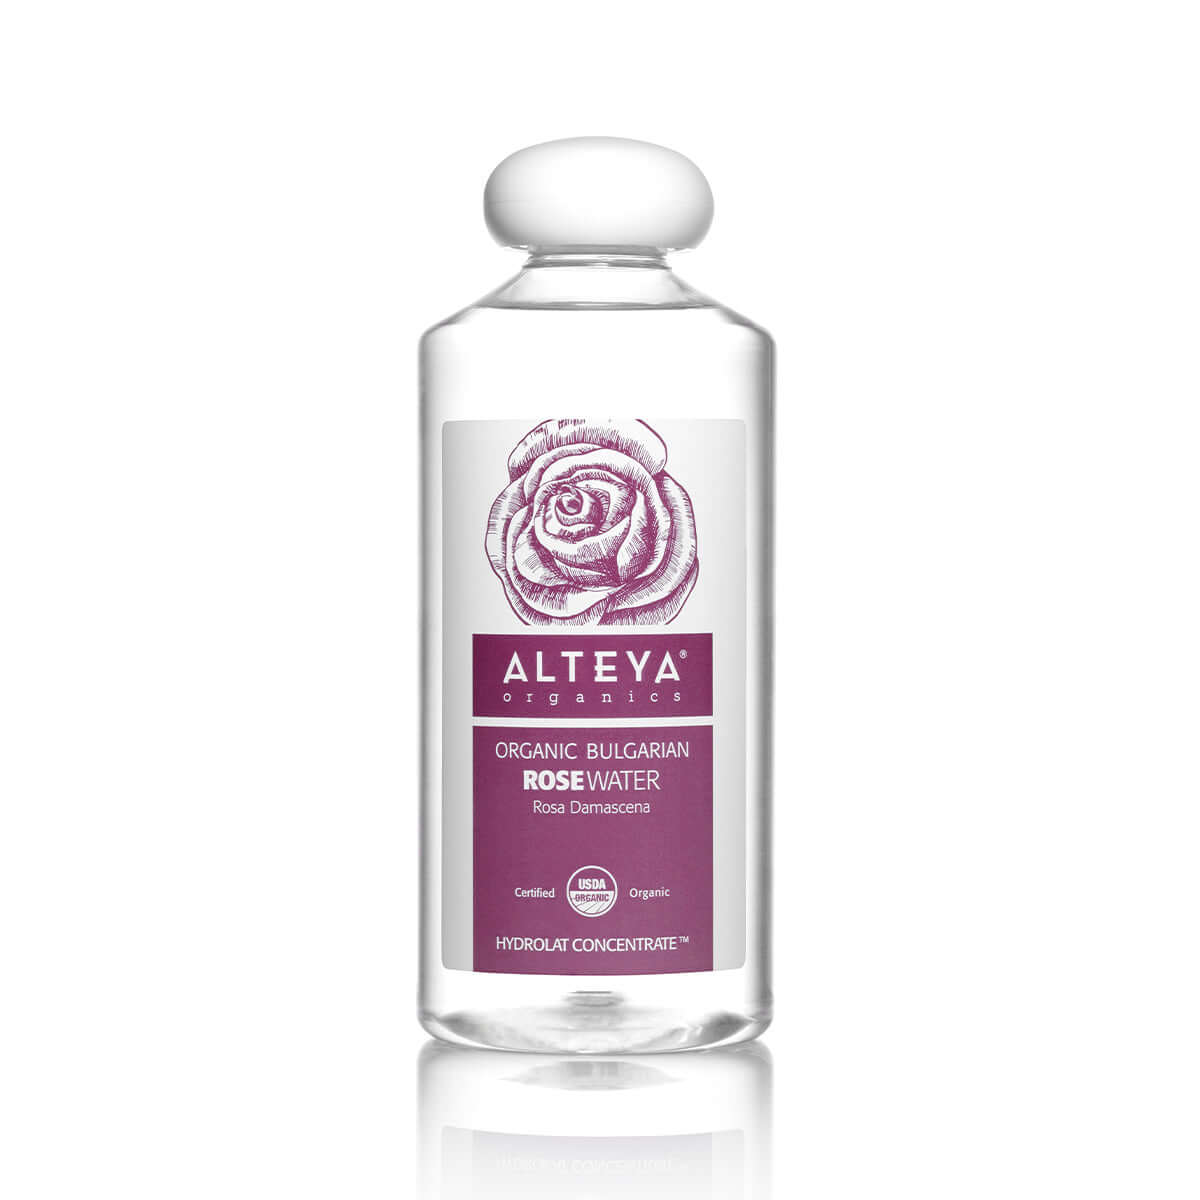 A bottle of Alteya Organics Organic Bulgarian Rose Water - 17 Fl Oz, perfect for hydration and skincare.